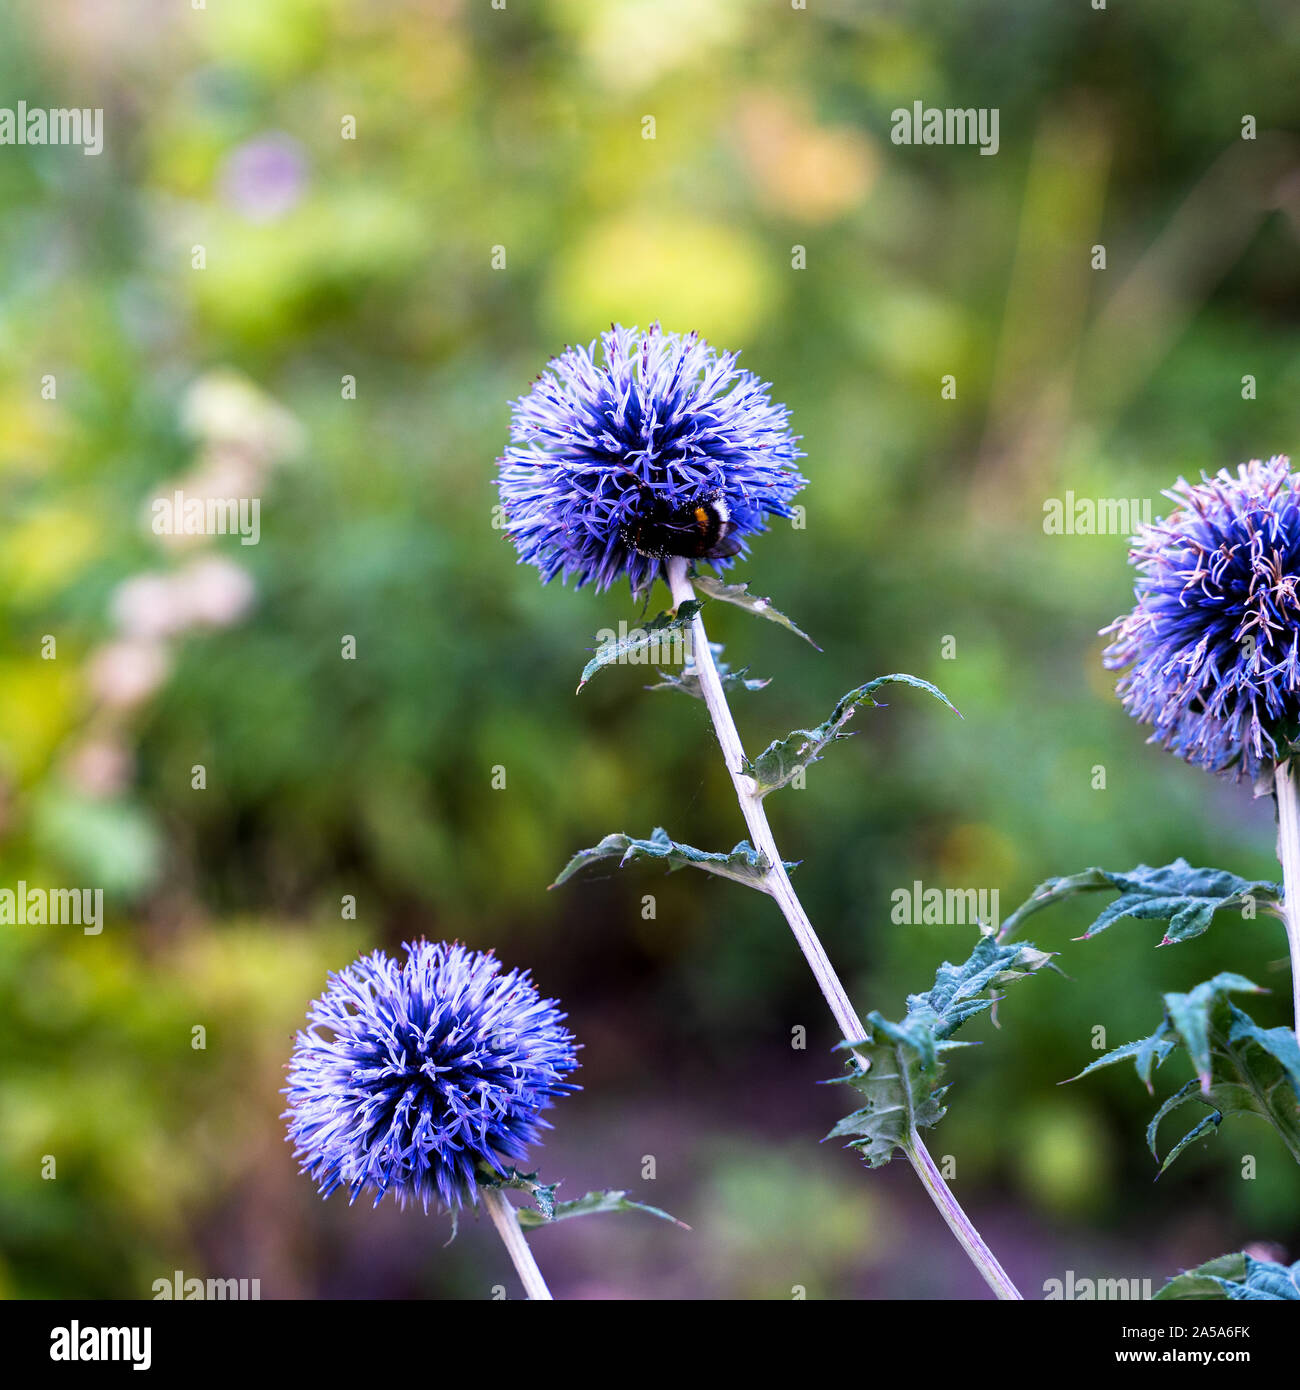 Globe thistle flowers during a nice summer evening attract insects, in this case a bumblebee looking for the nectar. Stock Photo